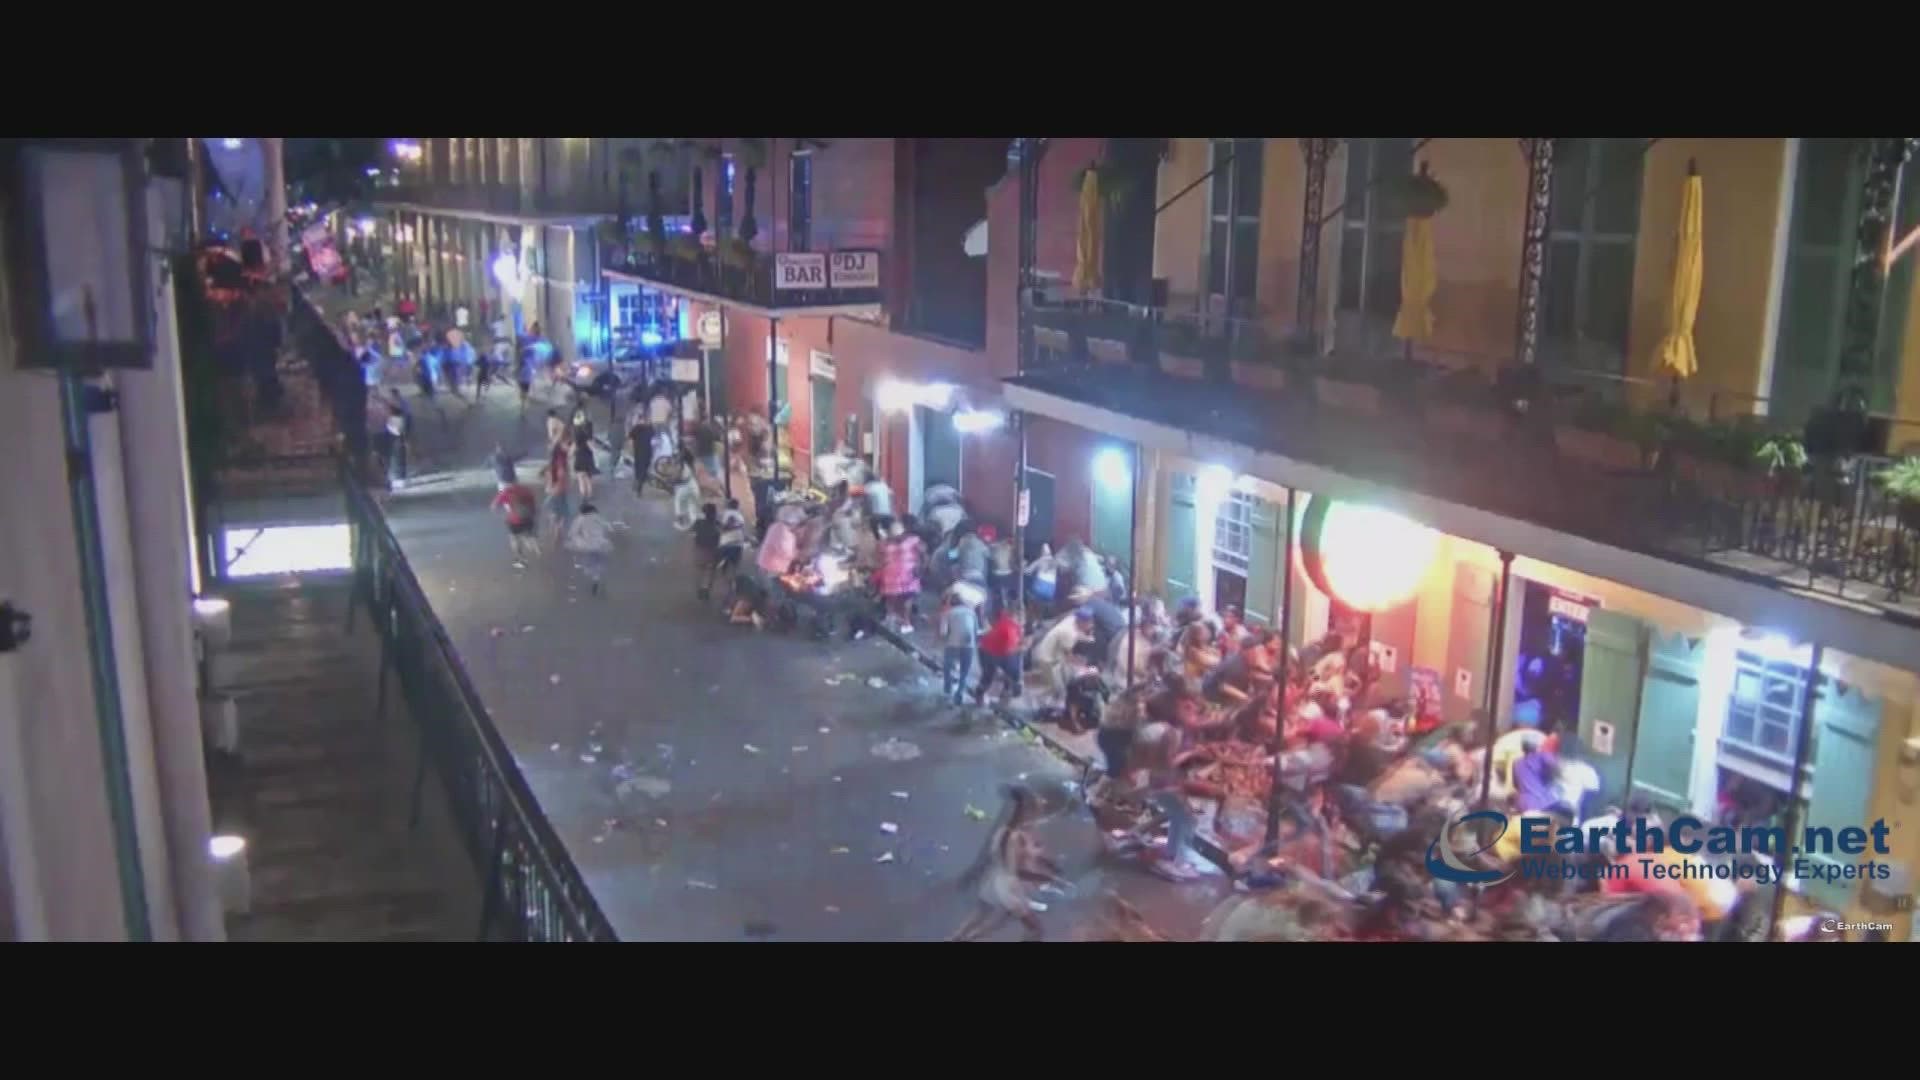 Five people were injured after a shooting on Bourbon Street for the second weekend in a row. A 17-year-old was taken into custody for being involved.